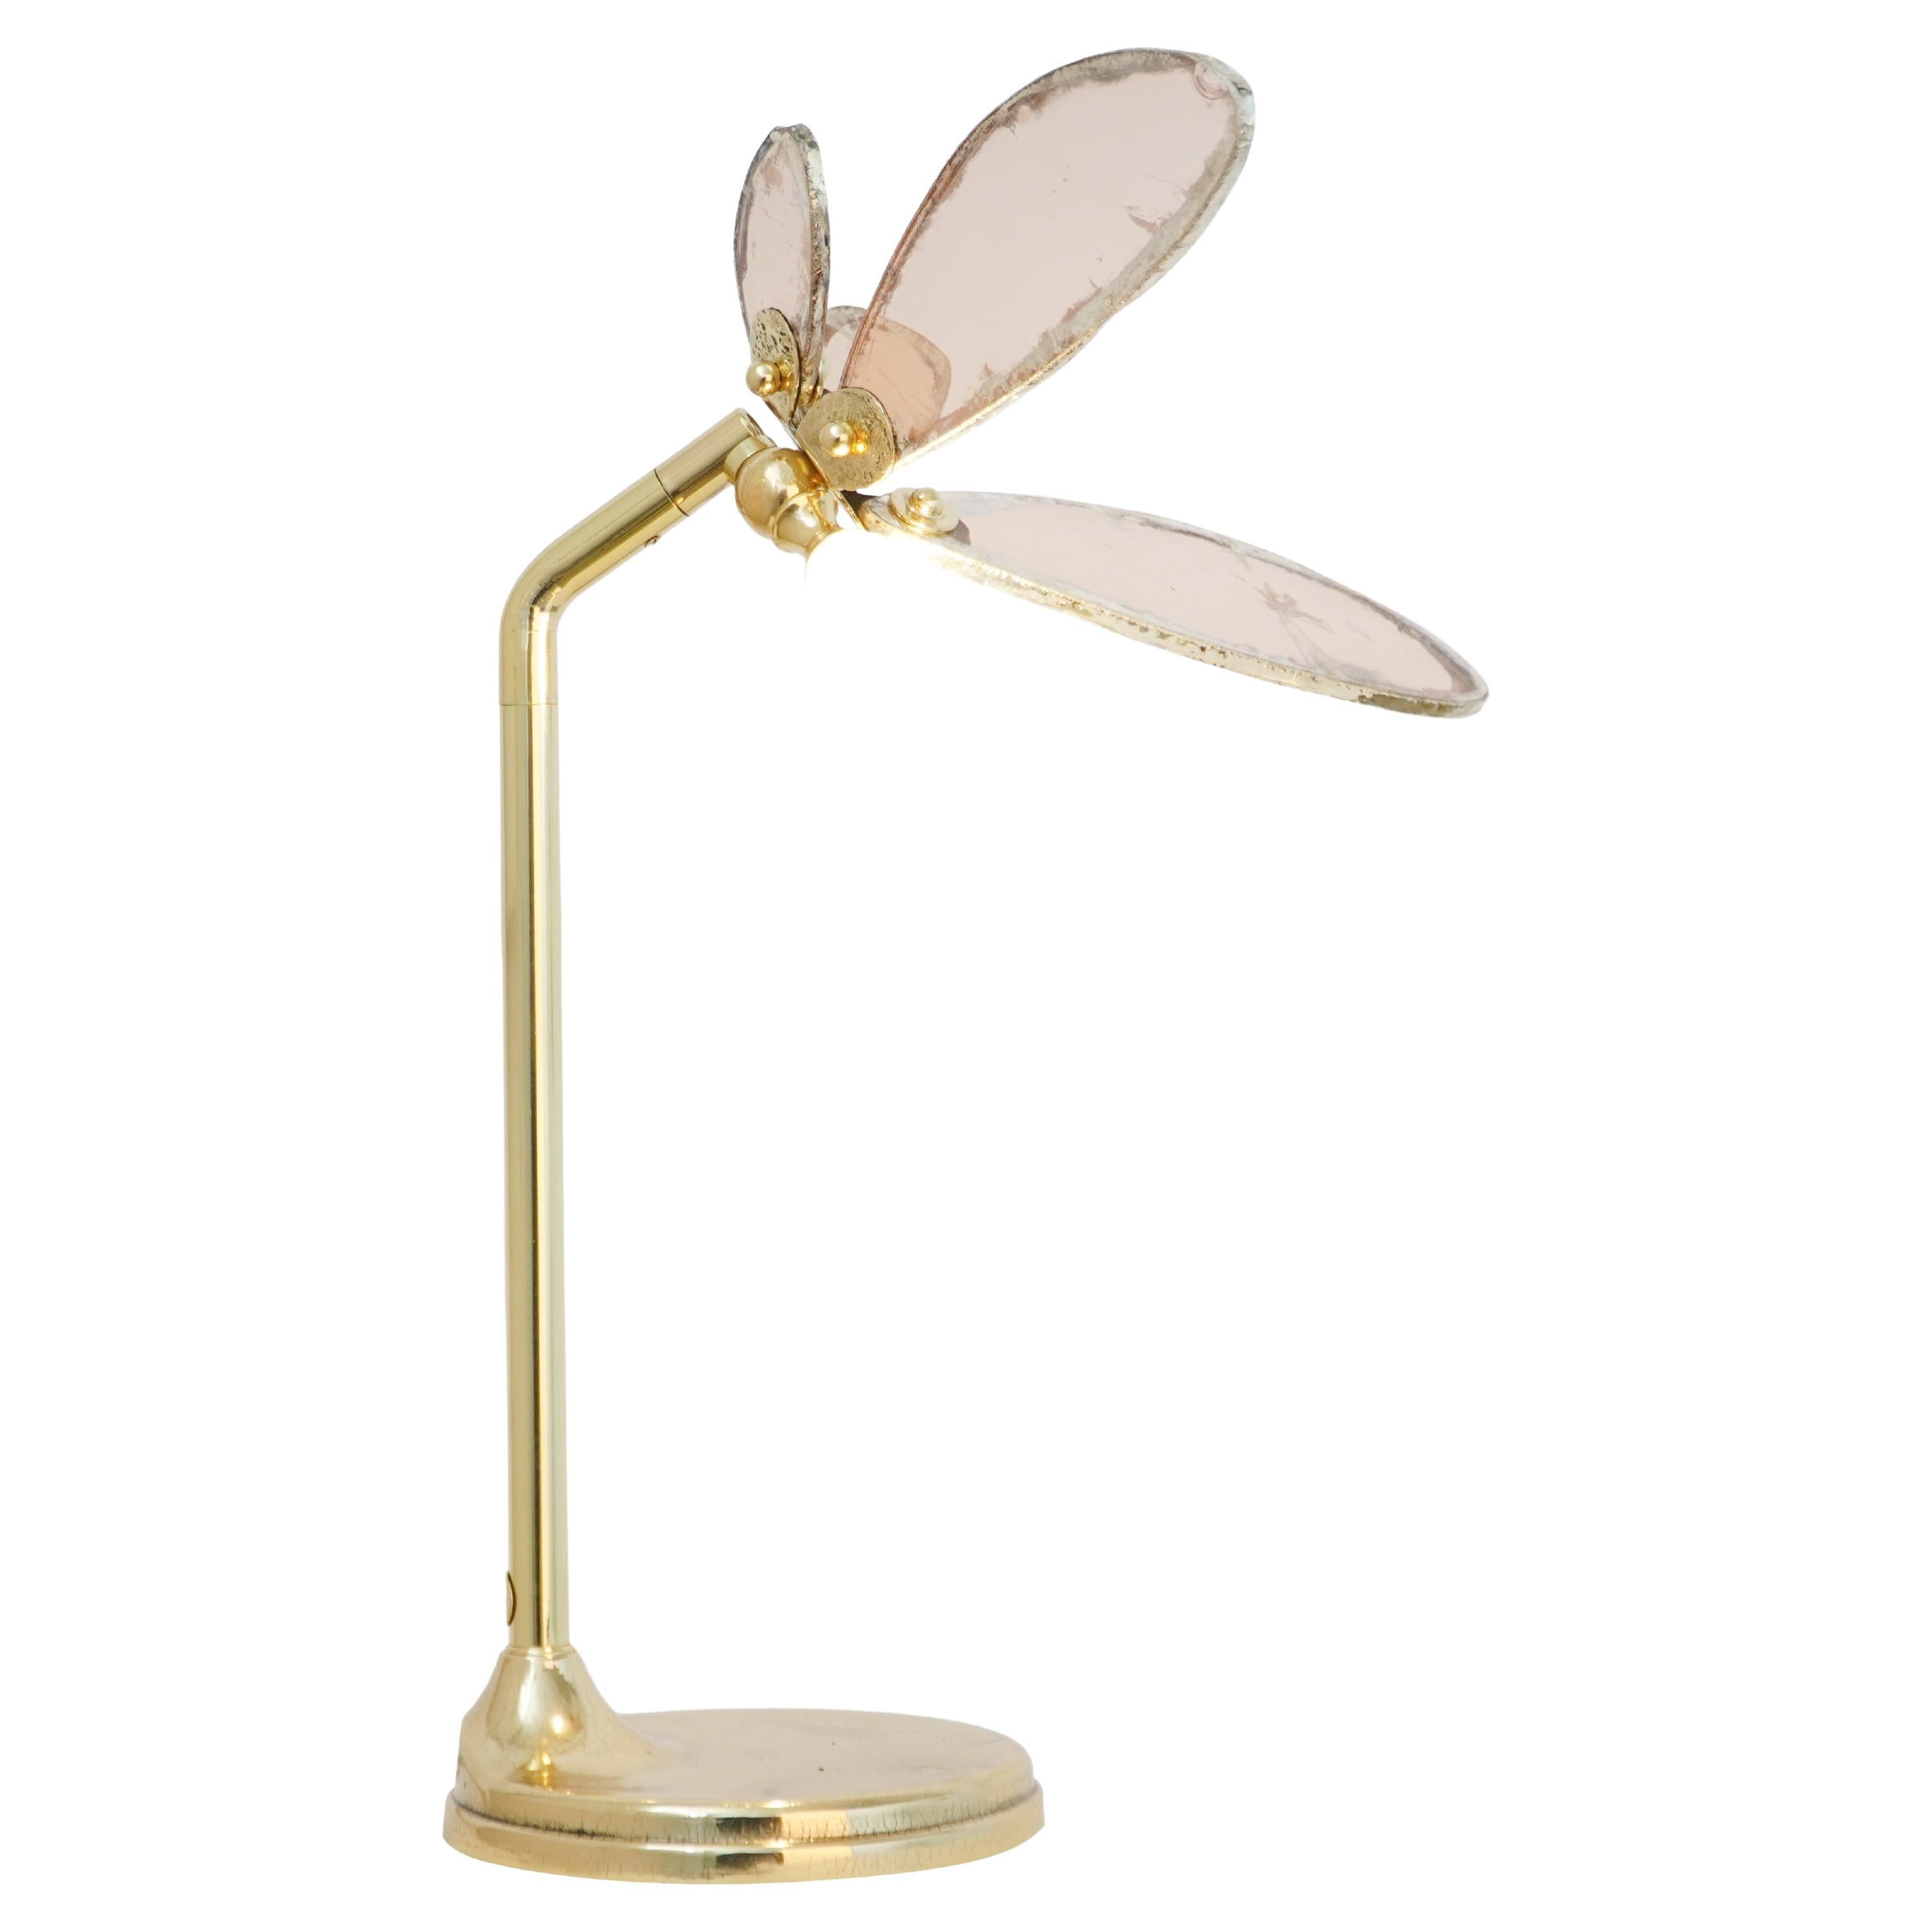 "Trilly" Contemporary Table Lamp Rose Silvered Art Glass, Brass Body